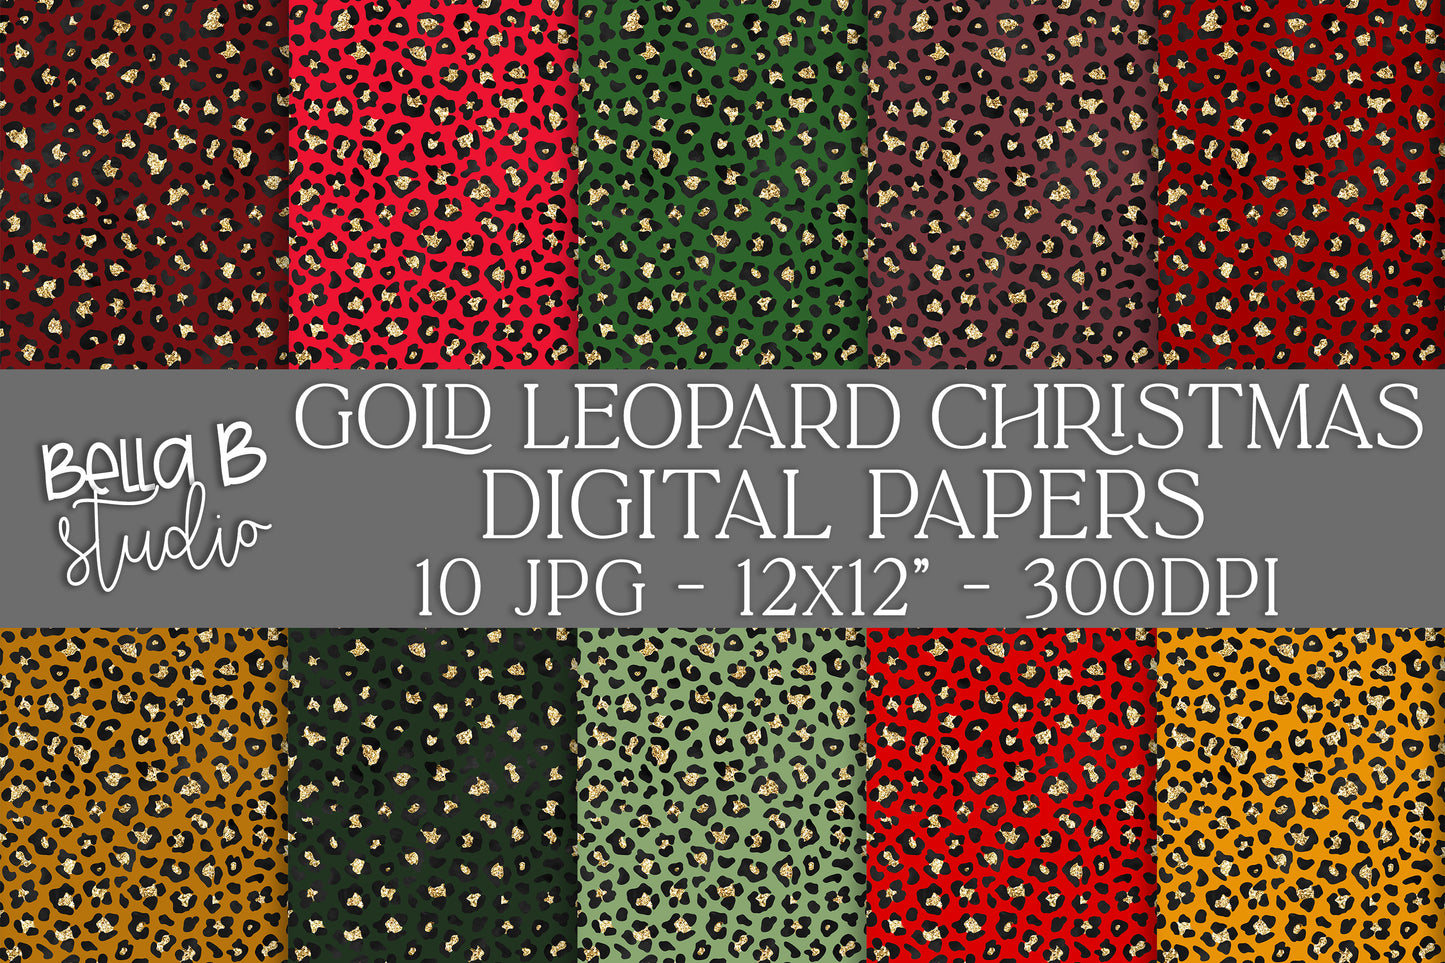 Gold Leopard Print Christmas Digital Papers